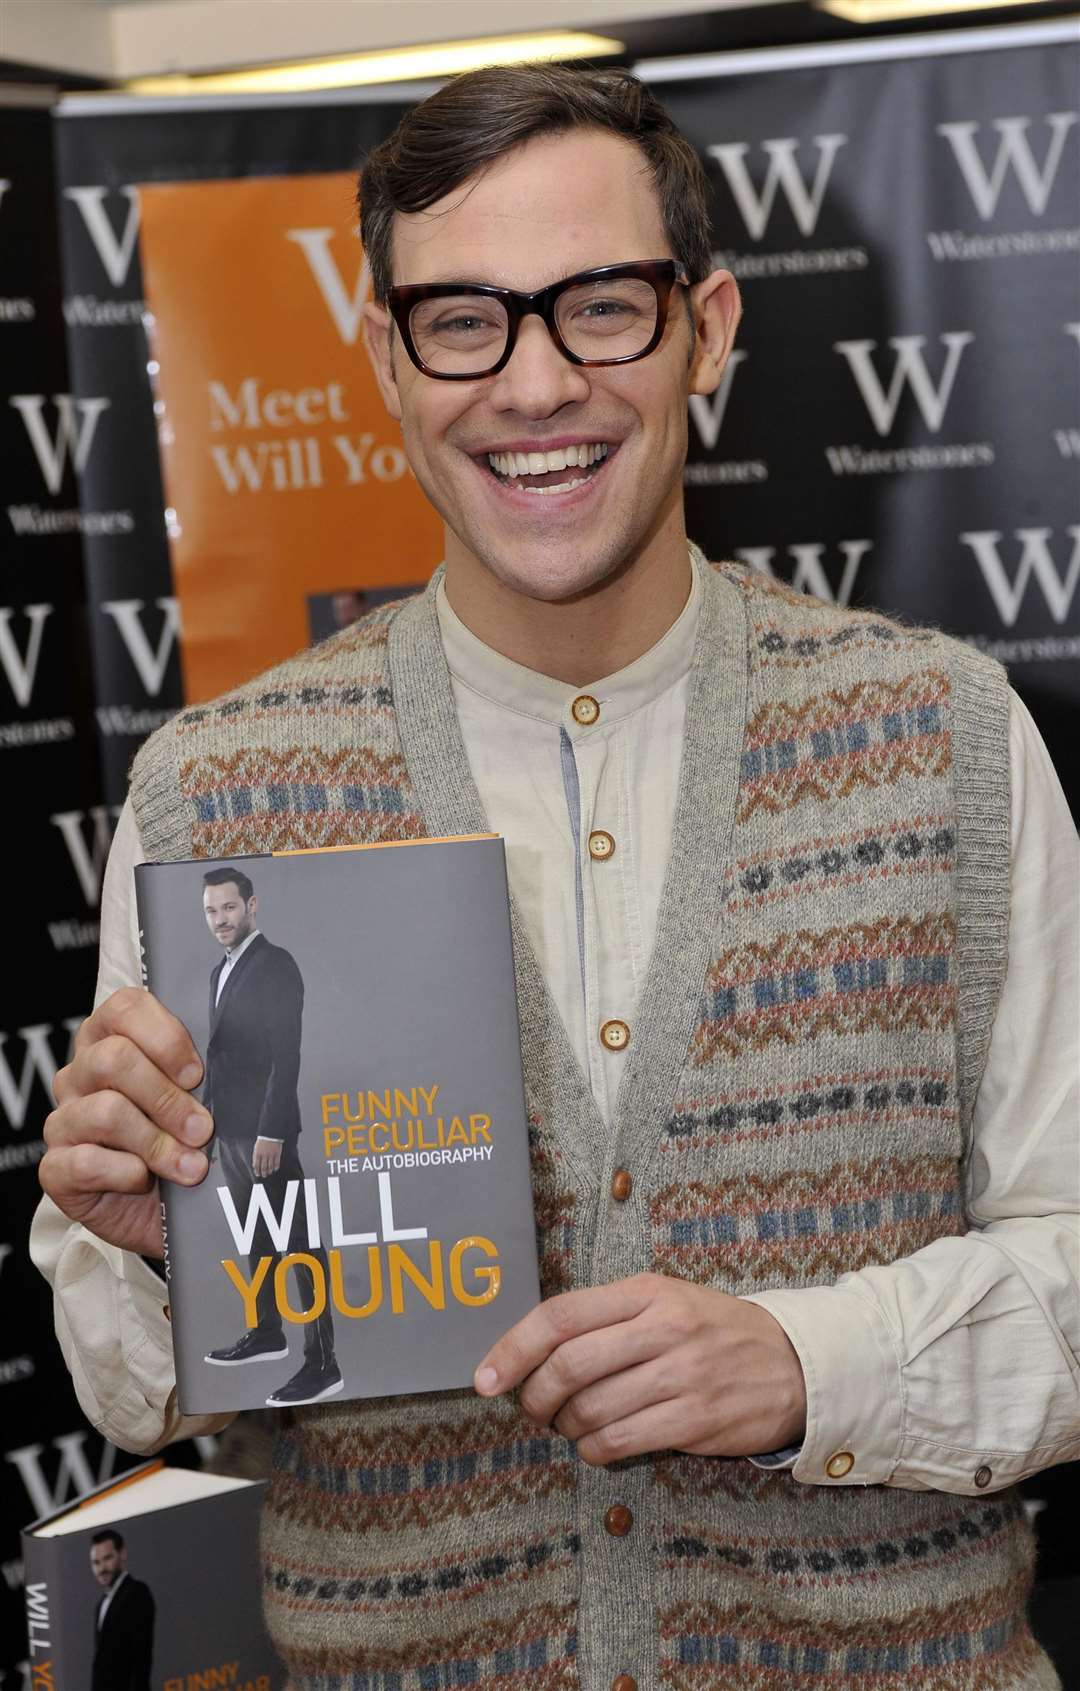 Will Young at Waterstones. Picture: Nick Johnson